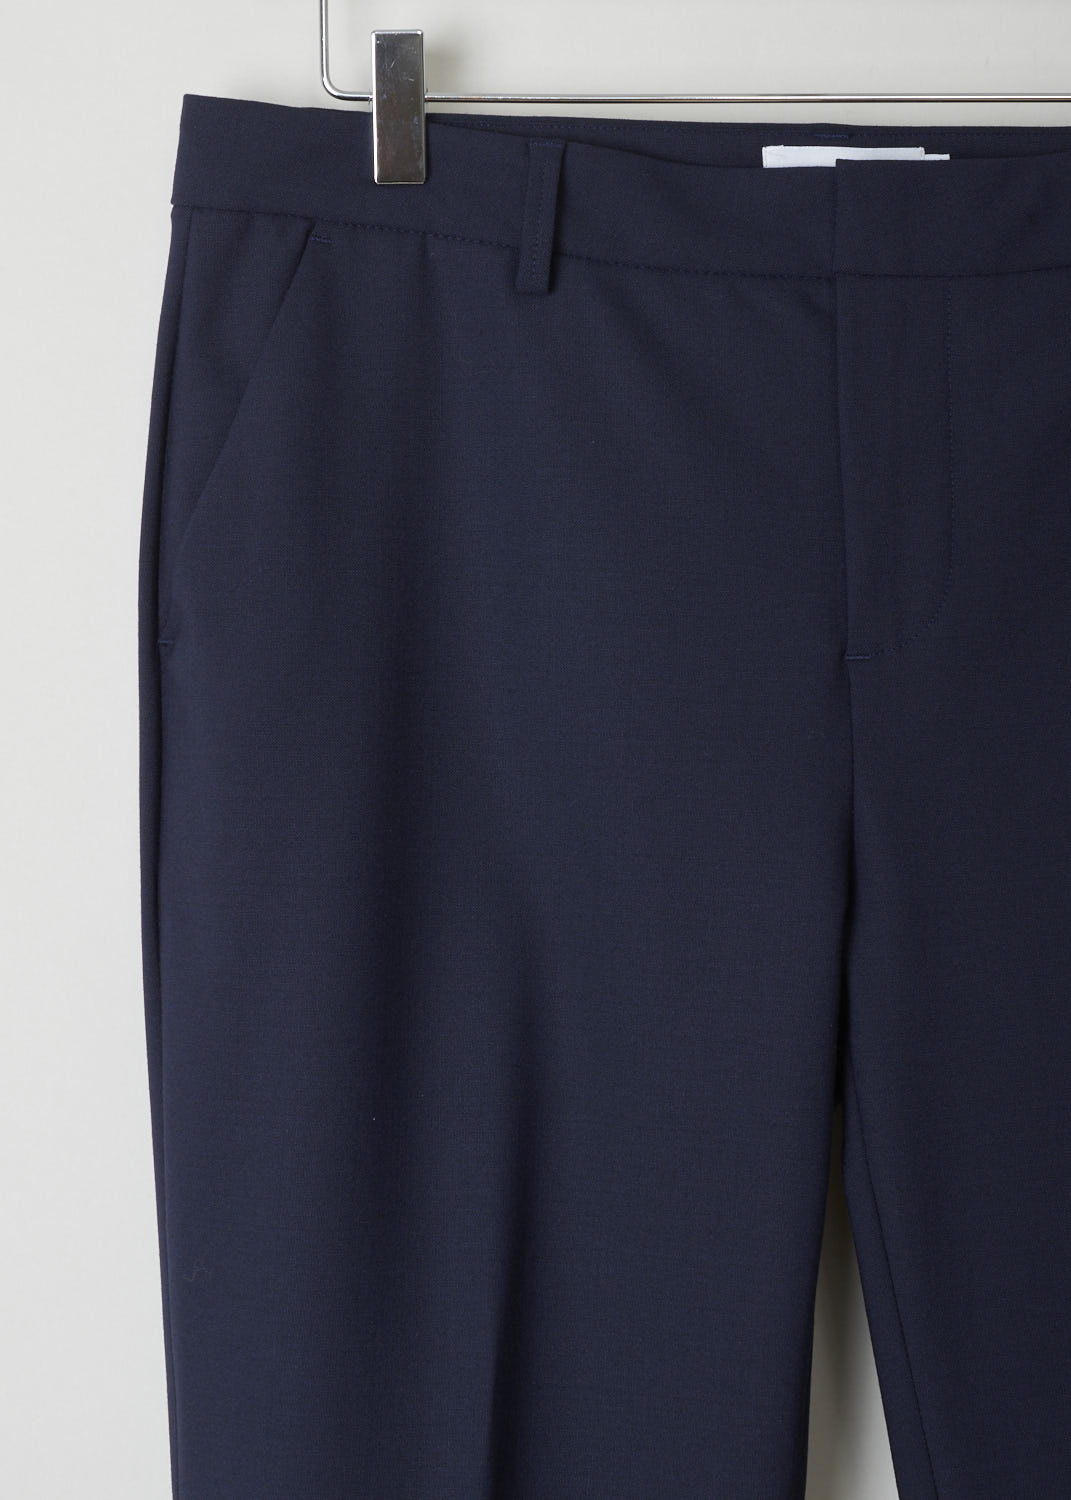 CLOSED, NAVY BLUE TROUSERS, STEWART_C91796_5H3_22_568, Blue, Detail, Made in the classic trouser model, featuring forward slanted pockets on the front and two welt pockets in the back. What makes this model stand out above the rest is the broad fold-over hem.
